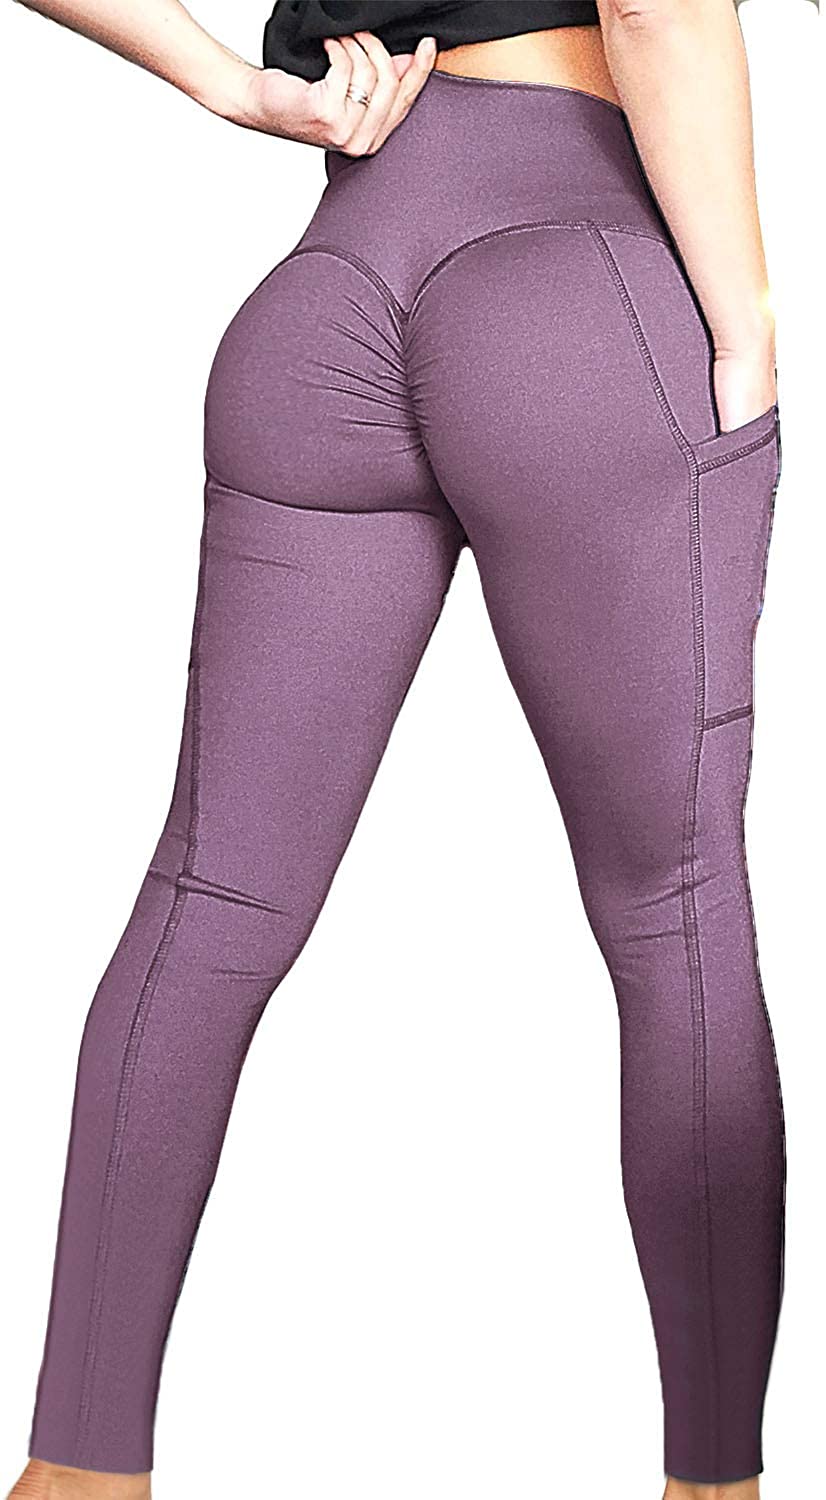 nsendm Unisex Pants Adult Sexy Yoga Pants for Women Butt with Top Control Tights  Women's Workout Leggings Womens Yoga Pants Petite with(Purple, M) 